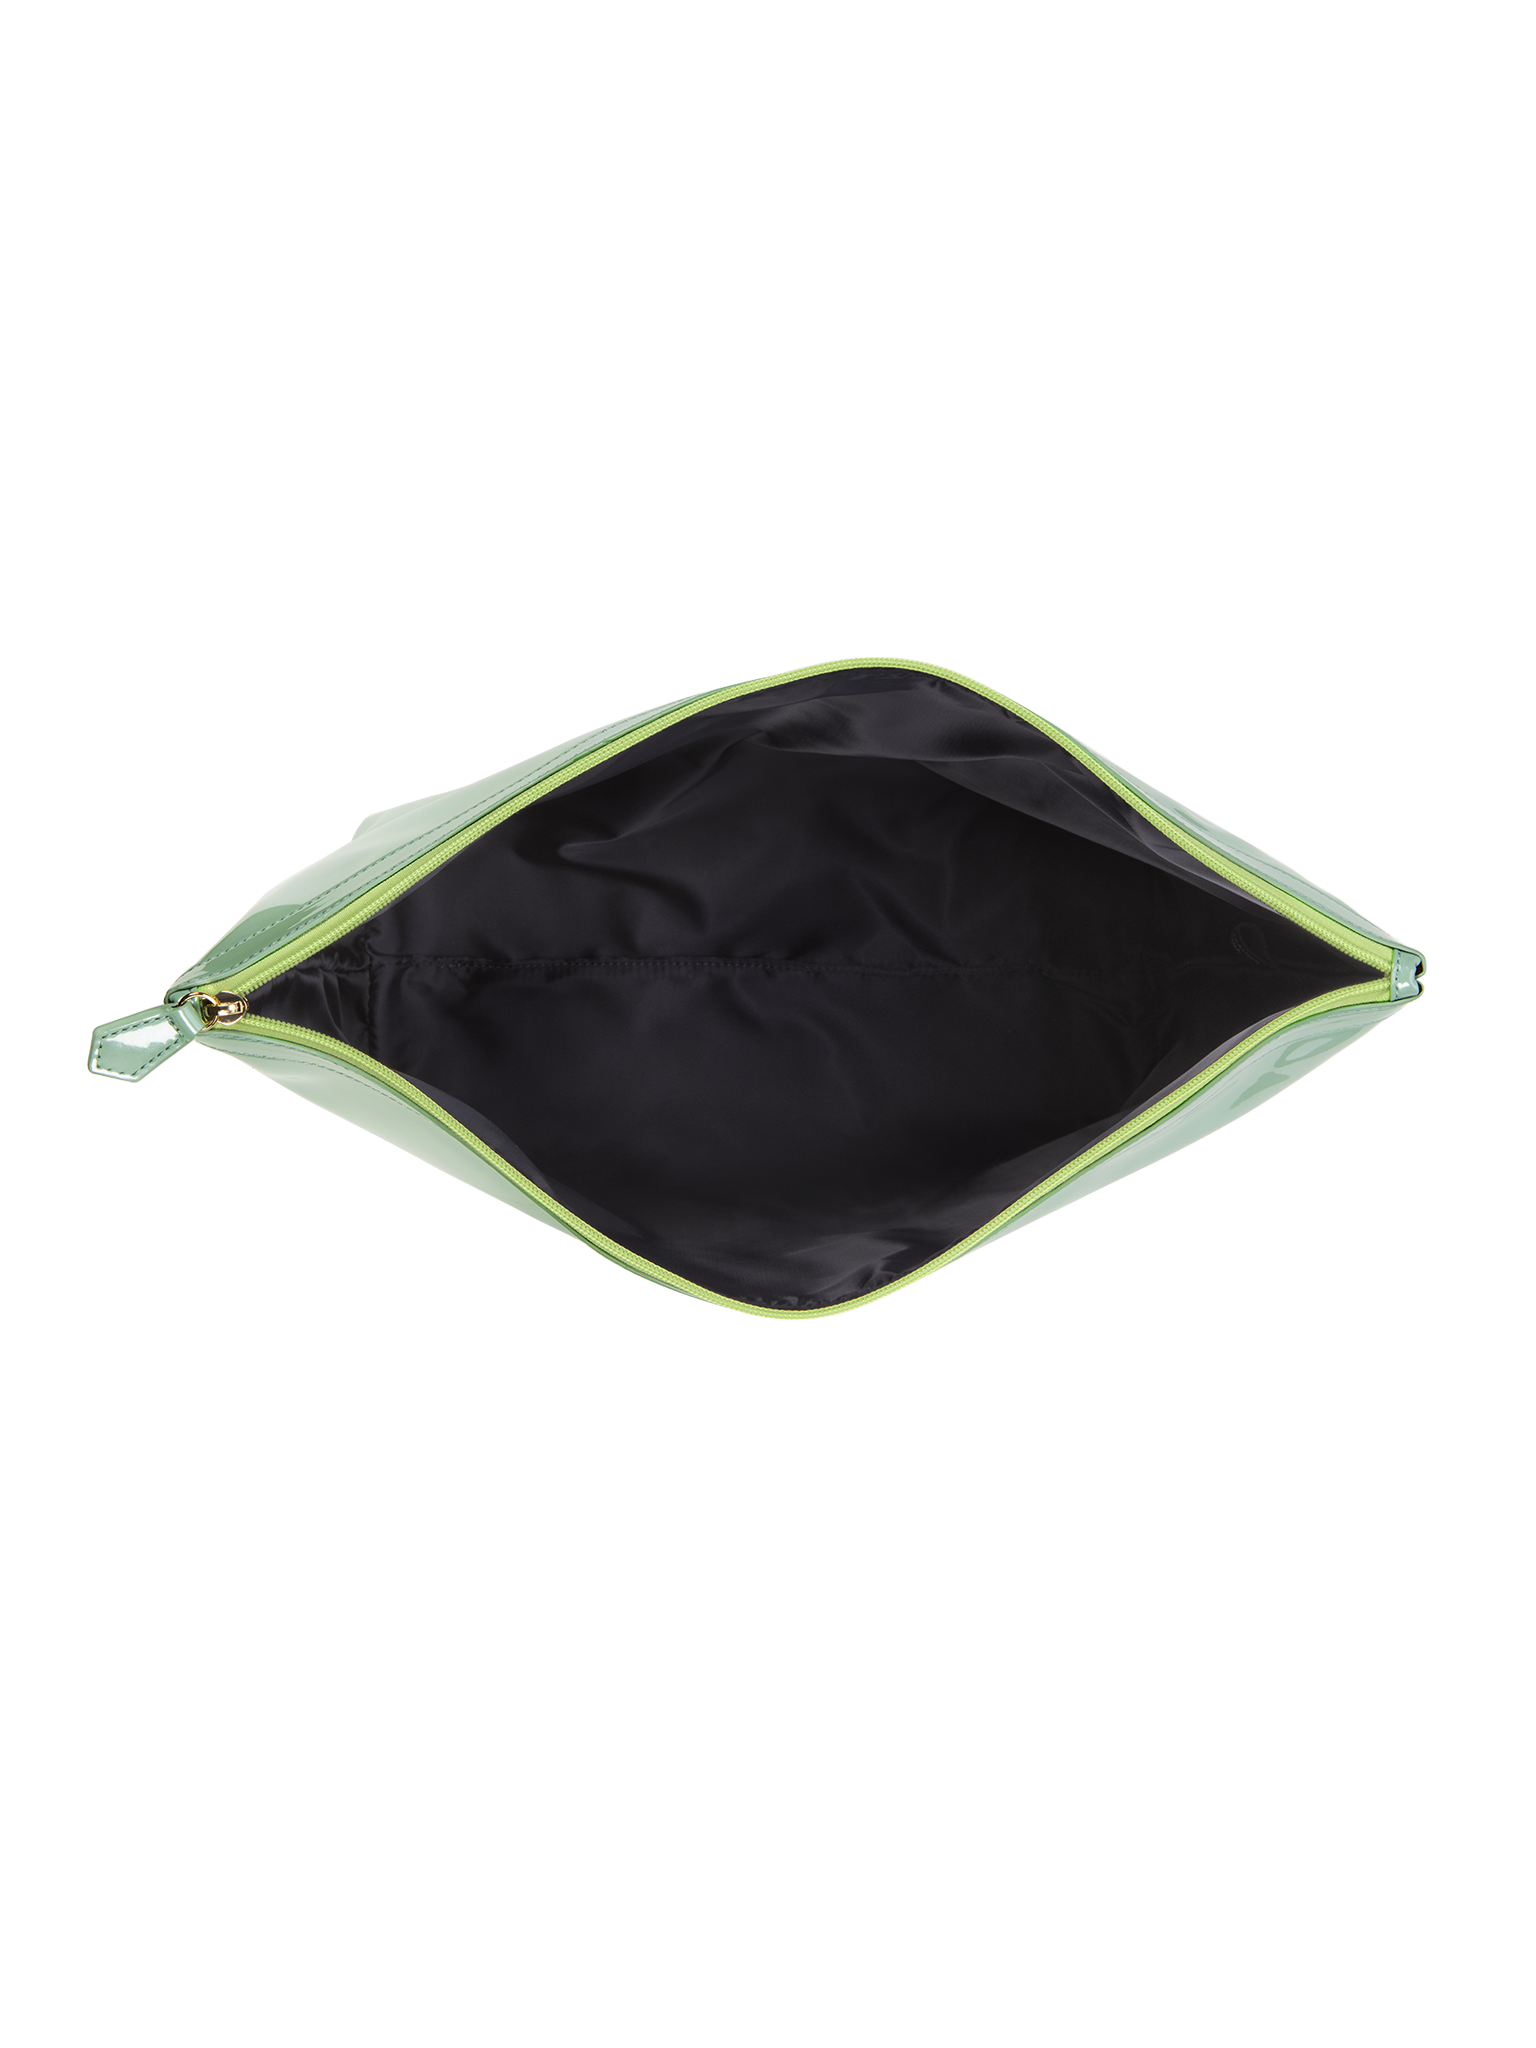 Designed with water resistant material, keep your items protected from the sun, sea and sand inside the large vegan leather pouch 